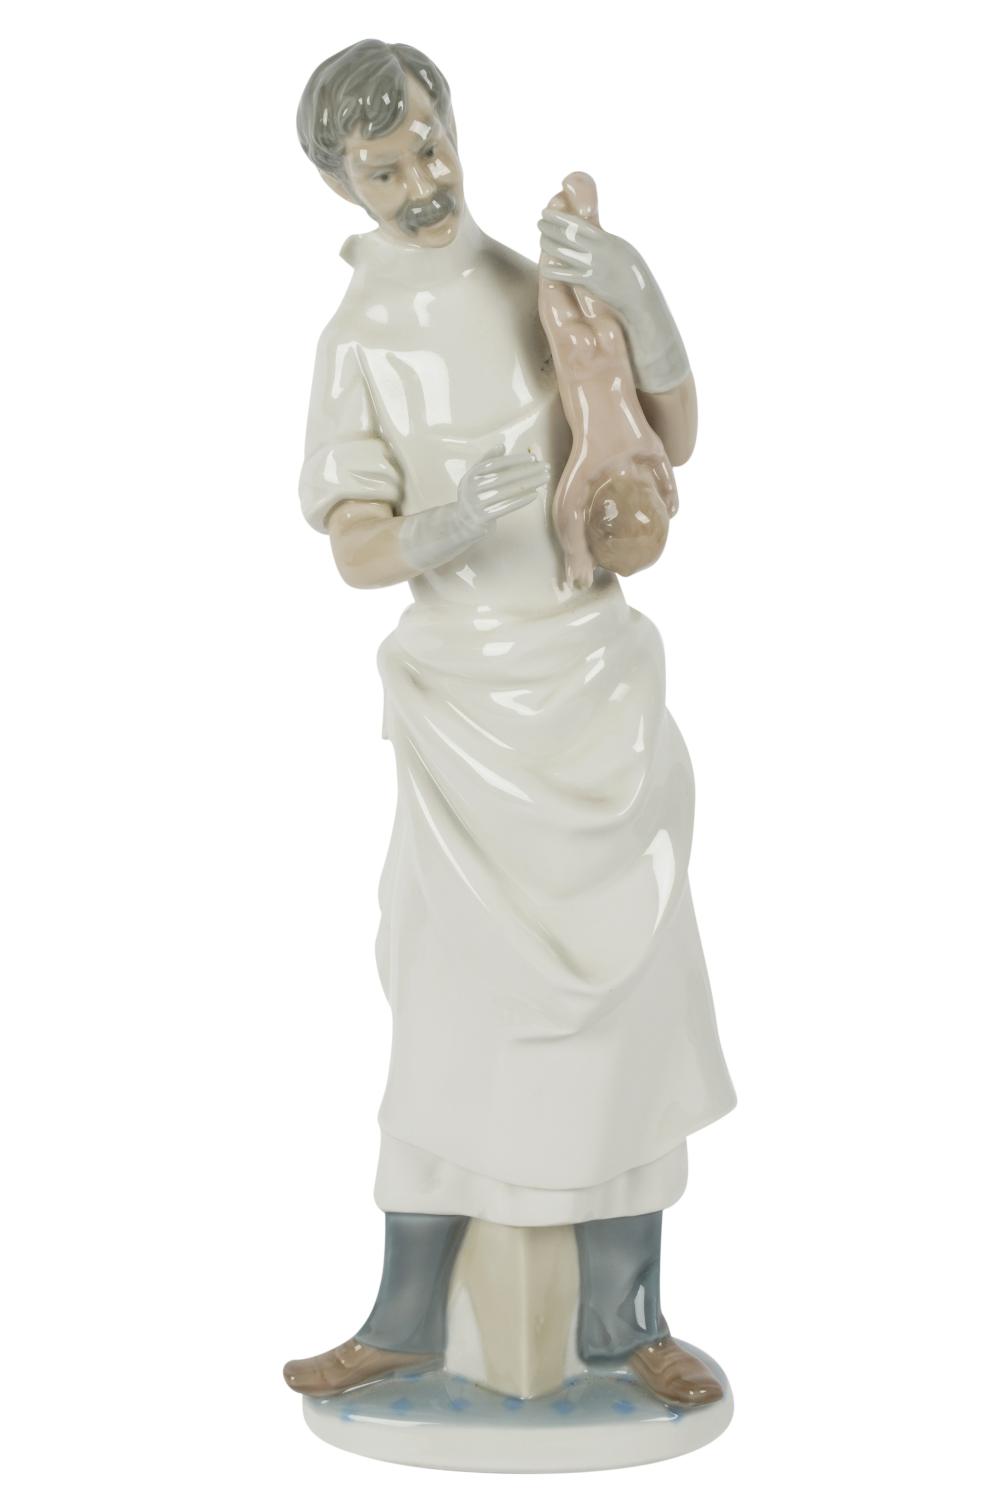 LLADRO PORCELAIN FIGURE OF A PHYSICIAN